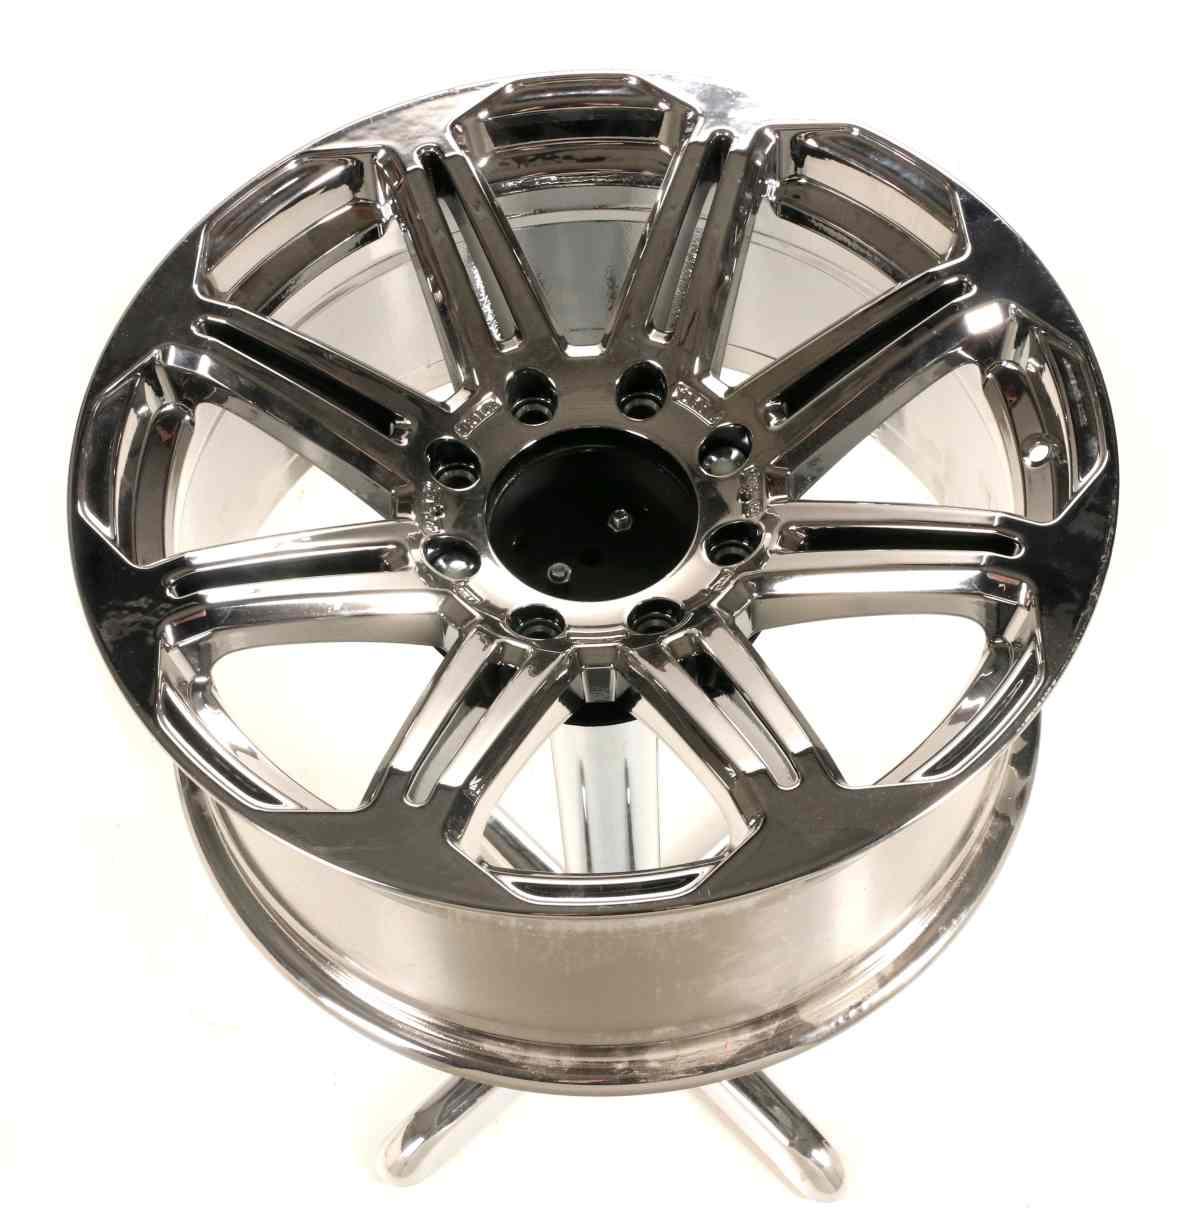 'STAND TABLE' FASHIONED FROM CHROME TRUCK WHEEL